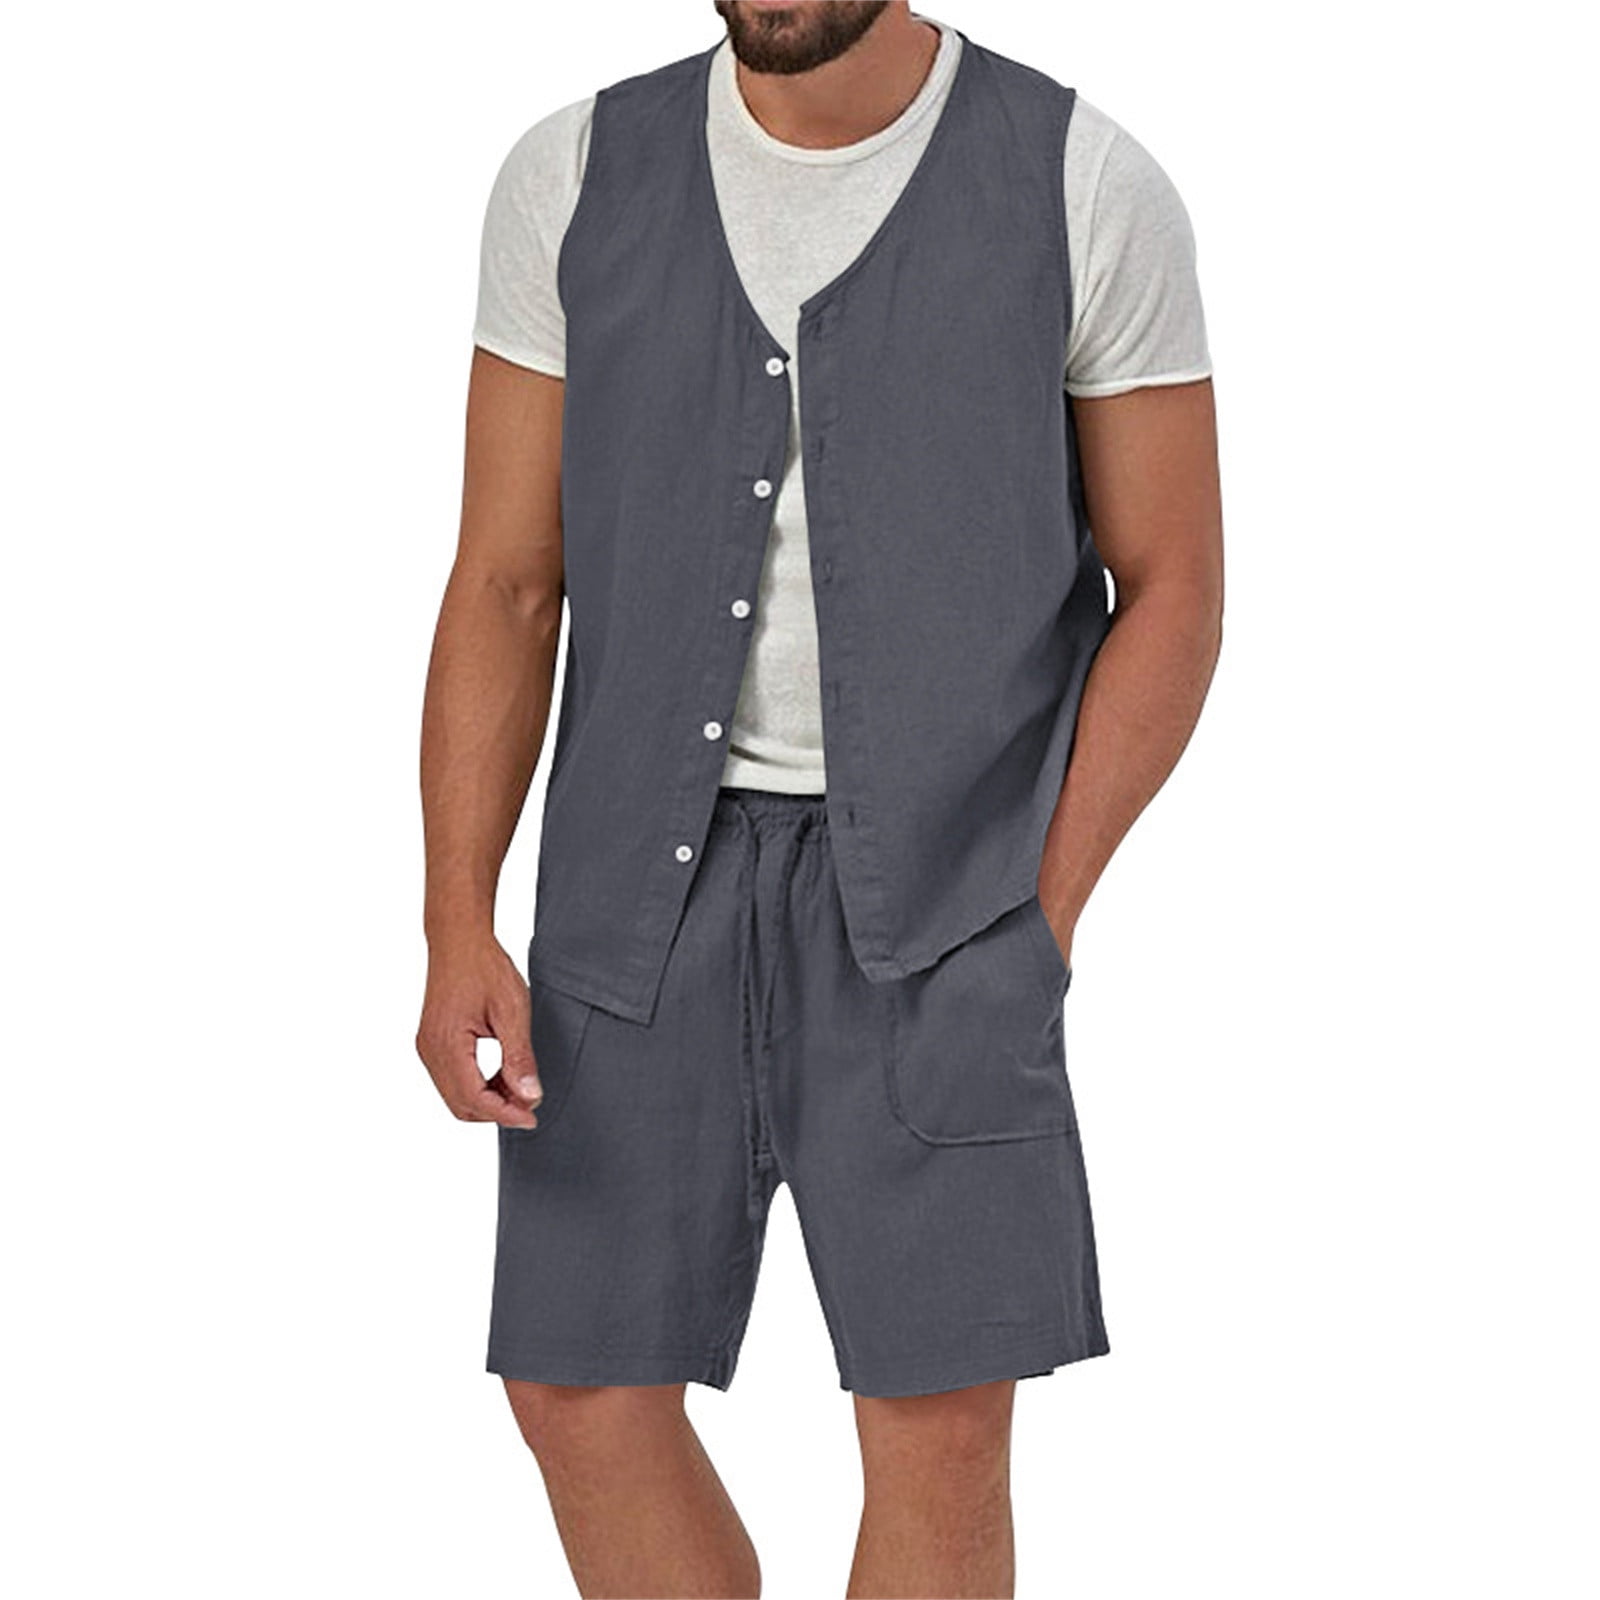 Abomasnow Men's 2 Piece Outfits Cotton Linen Button Down Tank Tops and ...